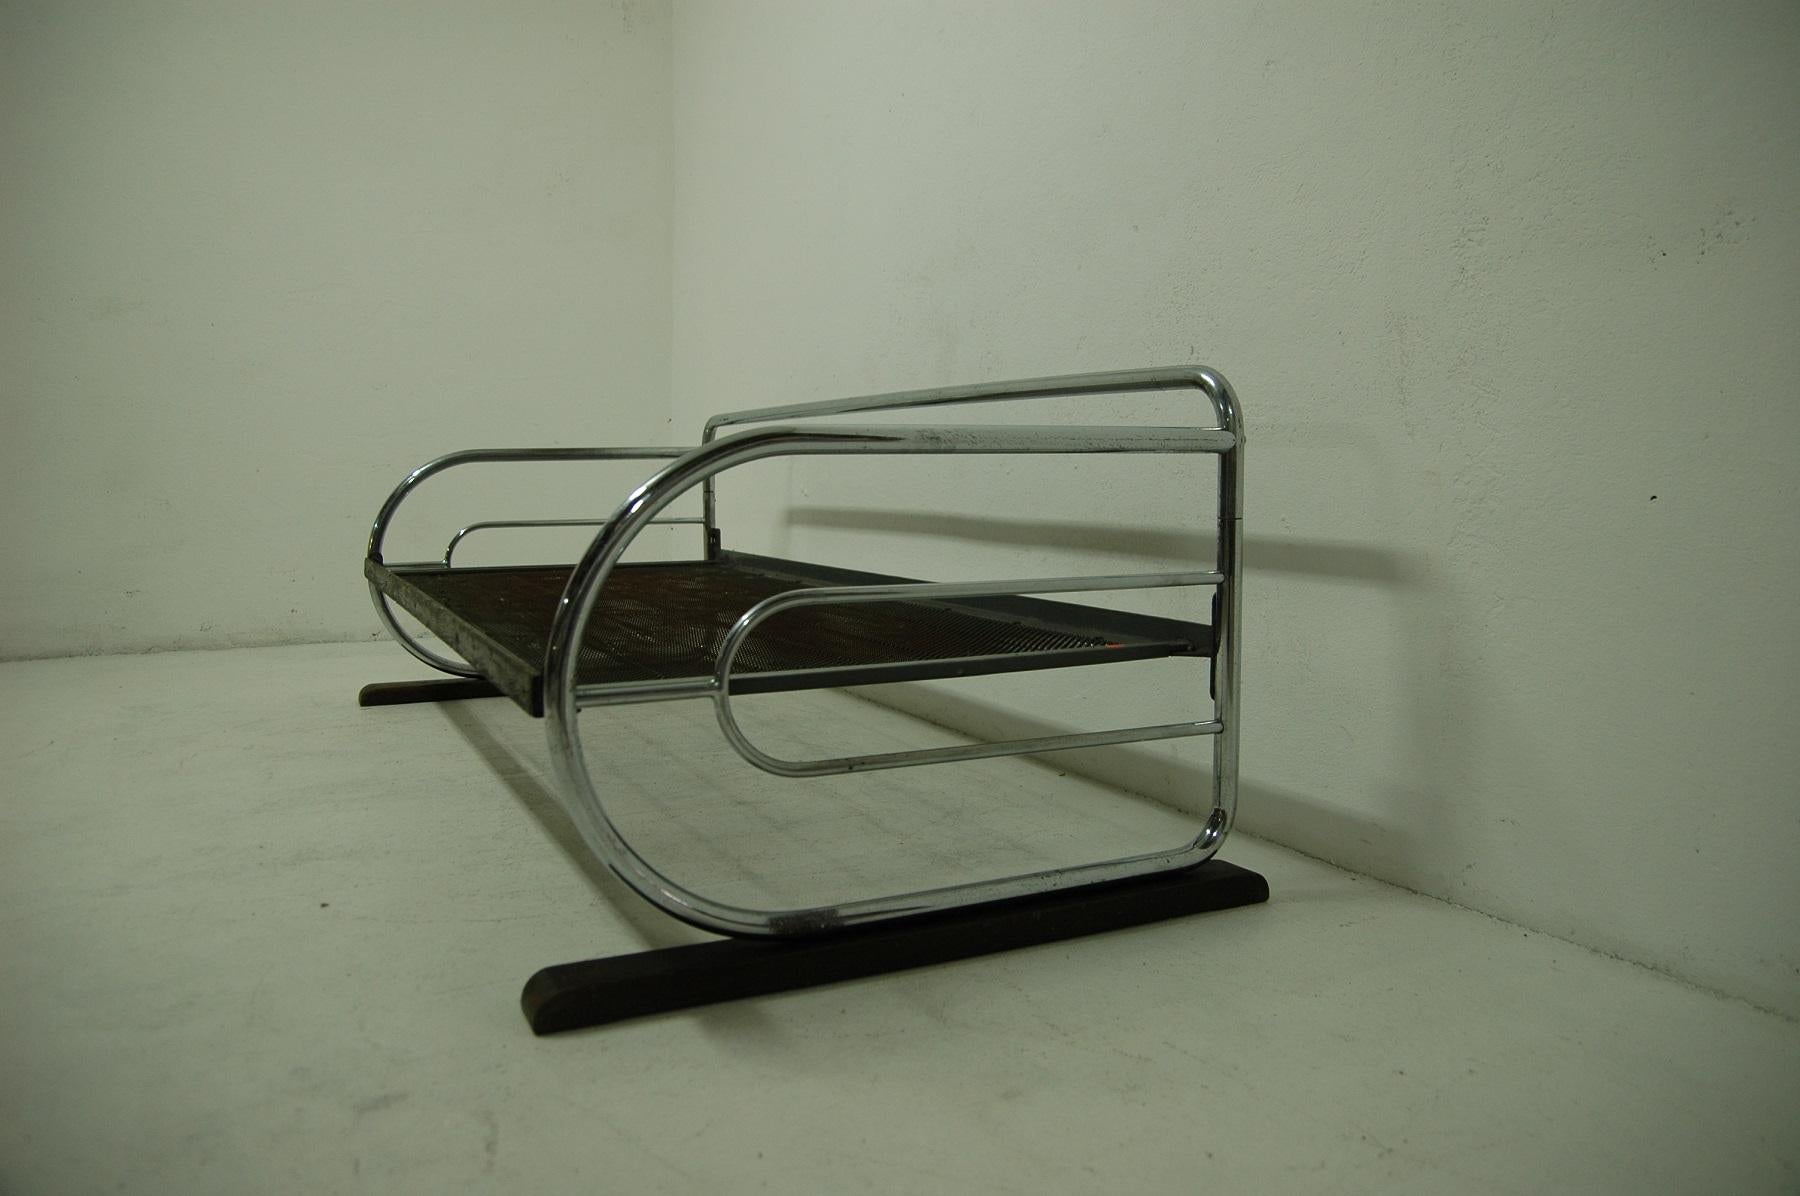 Chromed, tubular steel sofa from the Bauhaus period, 1930s, Bohemia. Made by Slezák company. Chrome is in good vintage condition, bears signs of aging and use, but overall in very good condition. The wooden slat in the front part shows signs of age